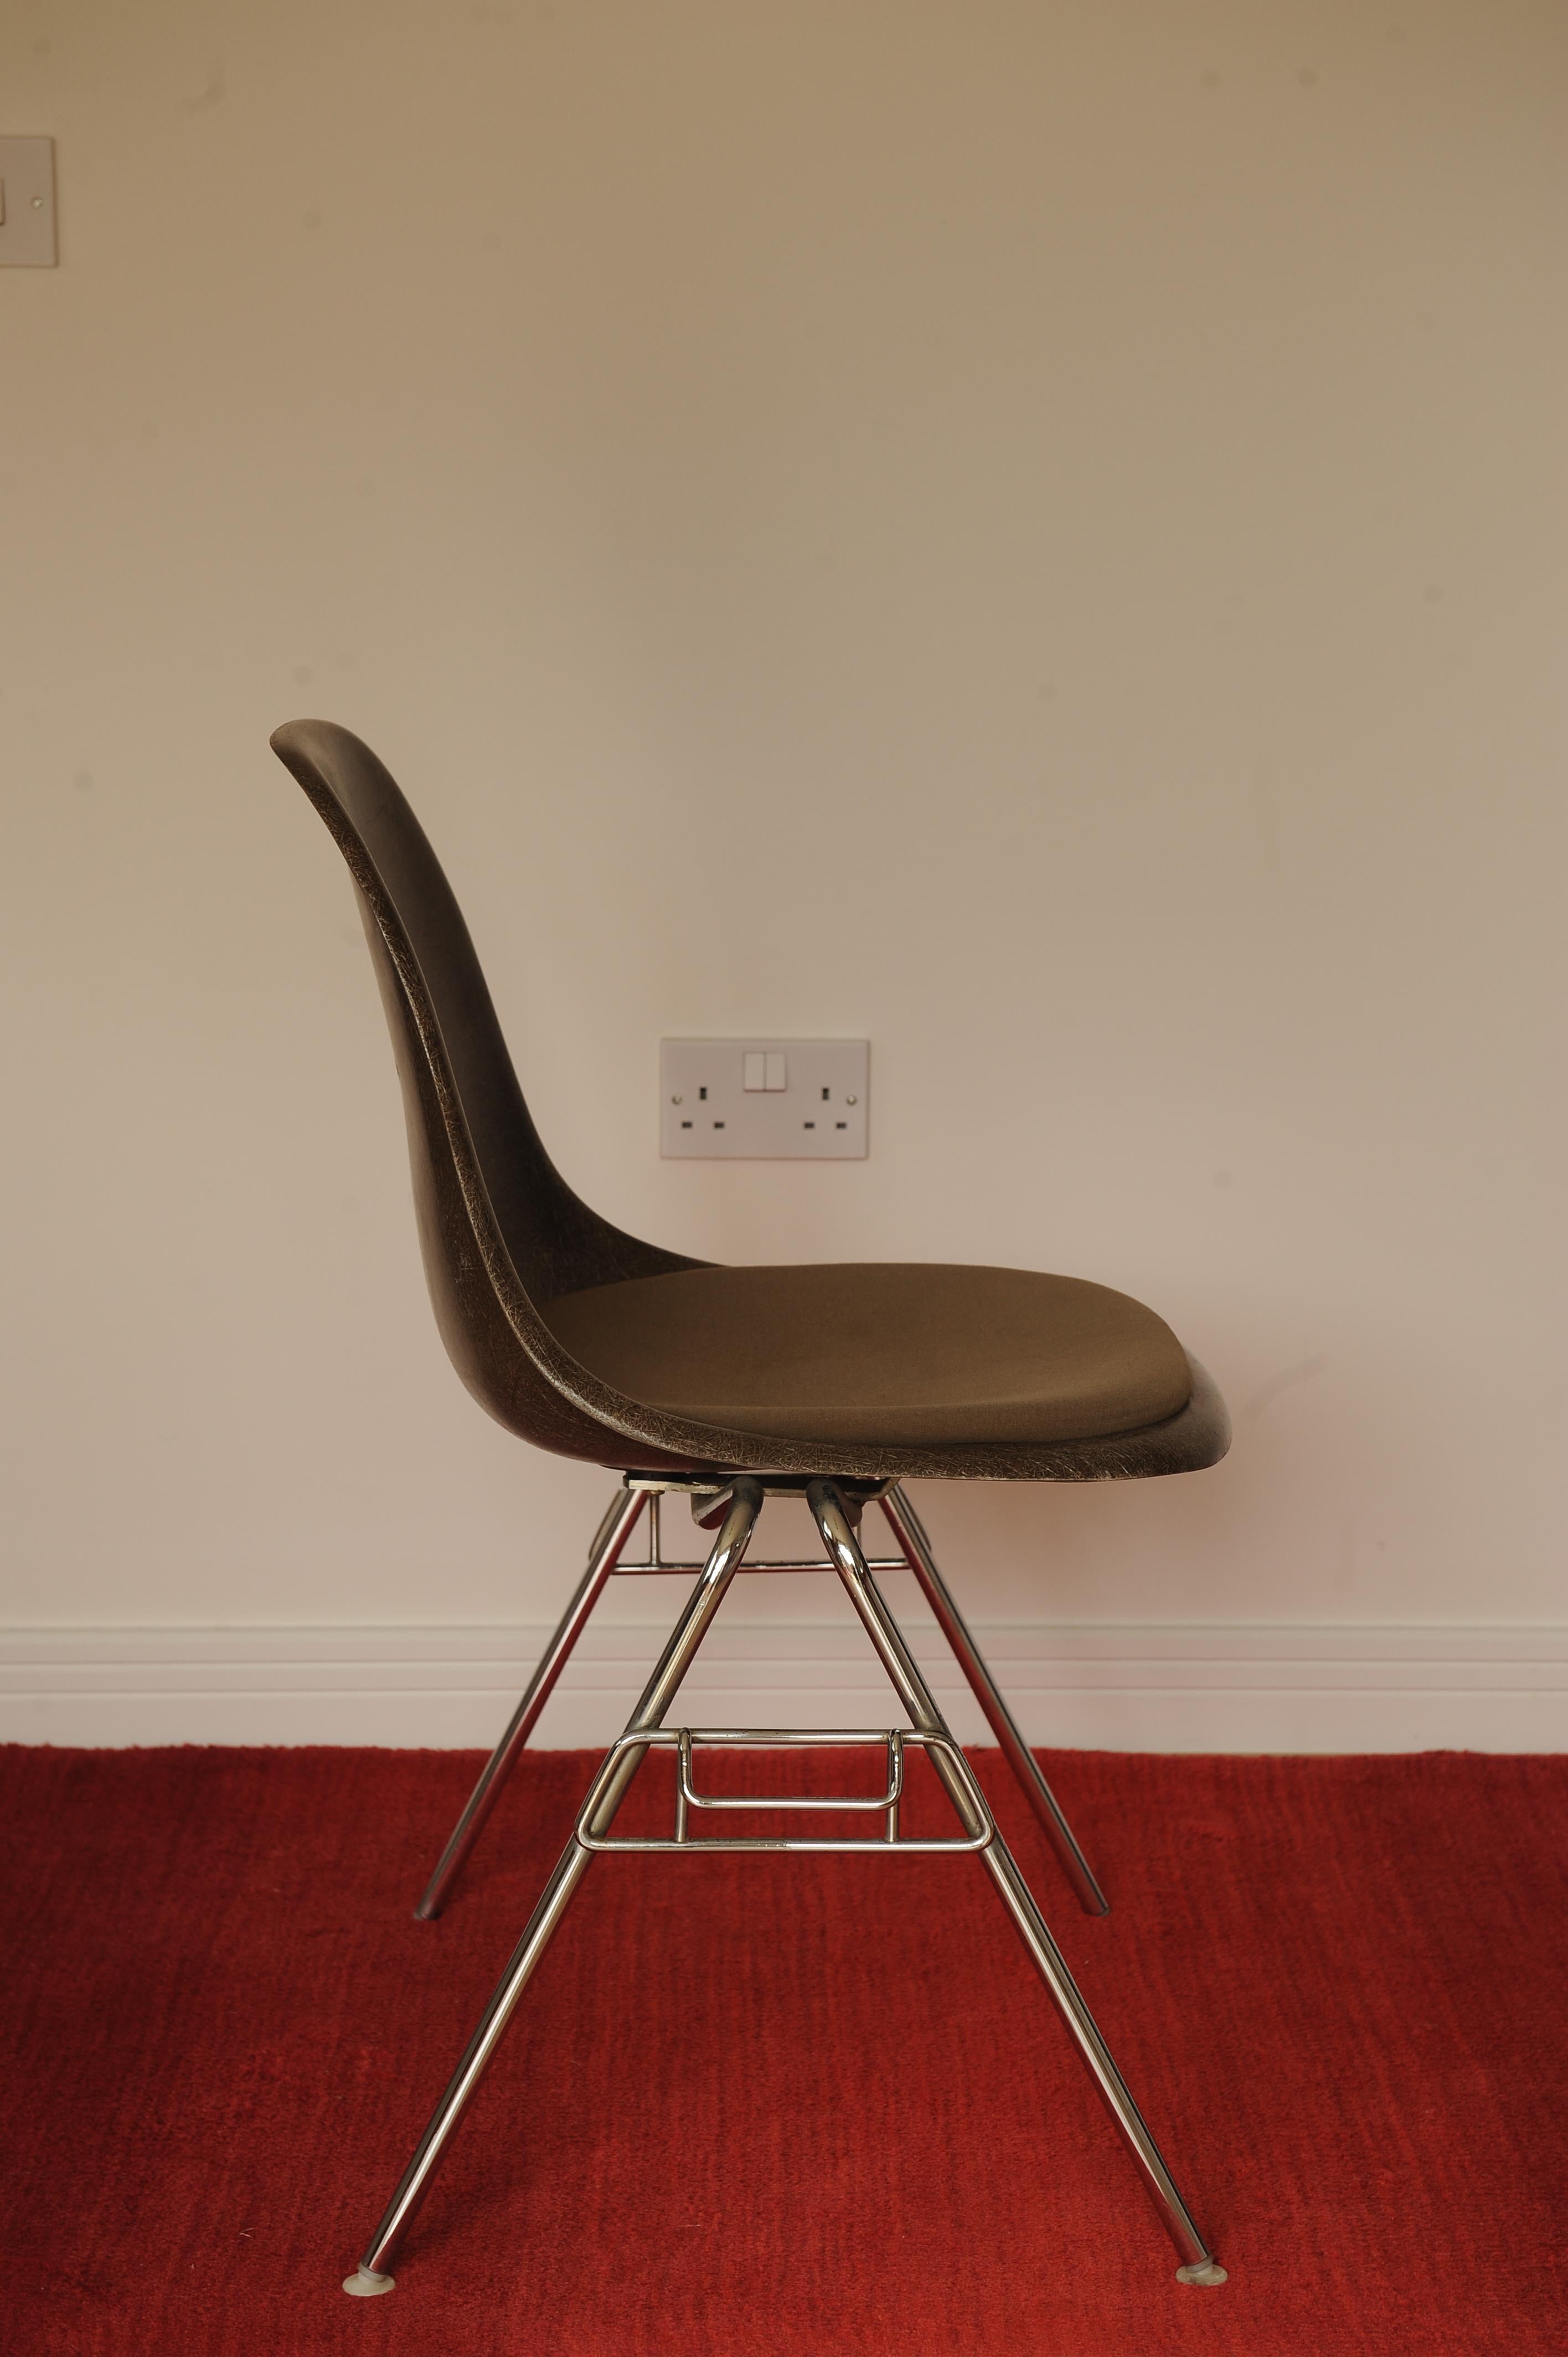 Brushed Charles & Ray Eames Herman Miller Original DSS Fiberglass Chrome Stacking Chair For Sale